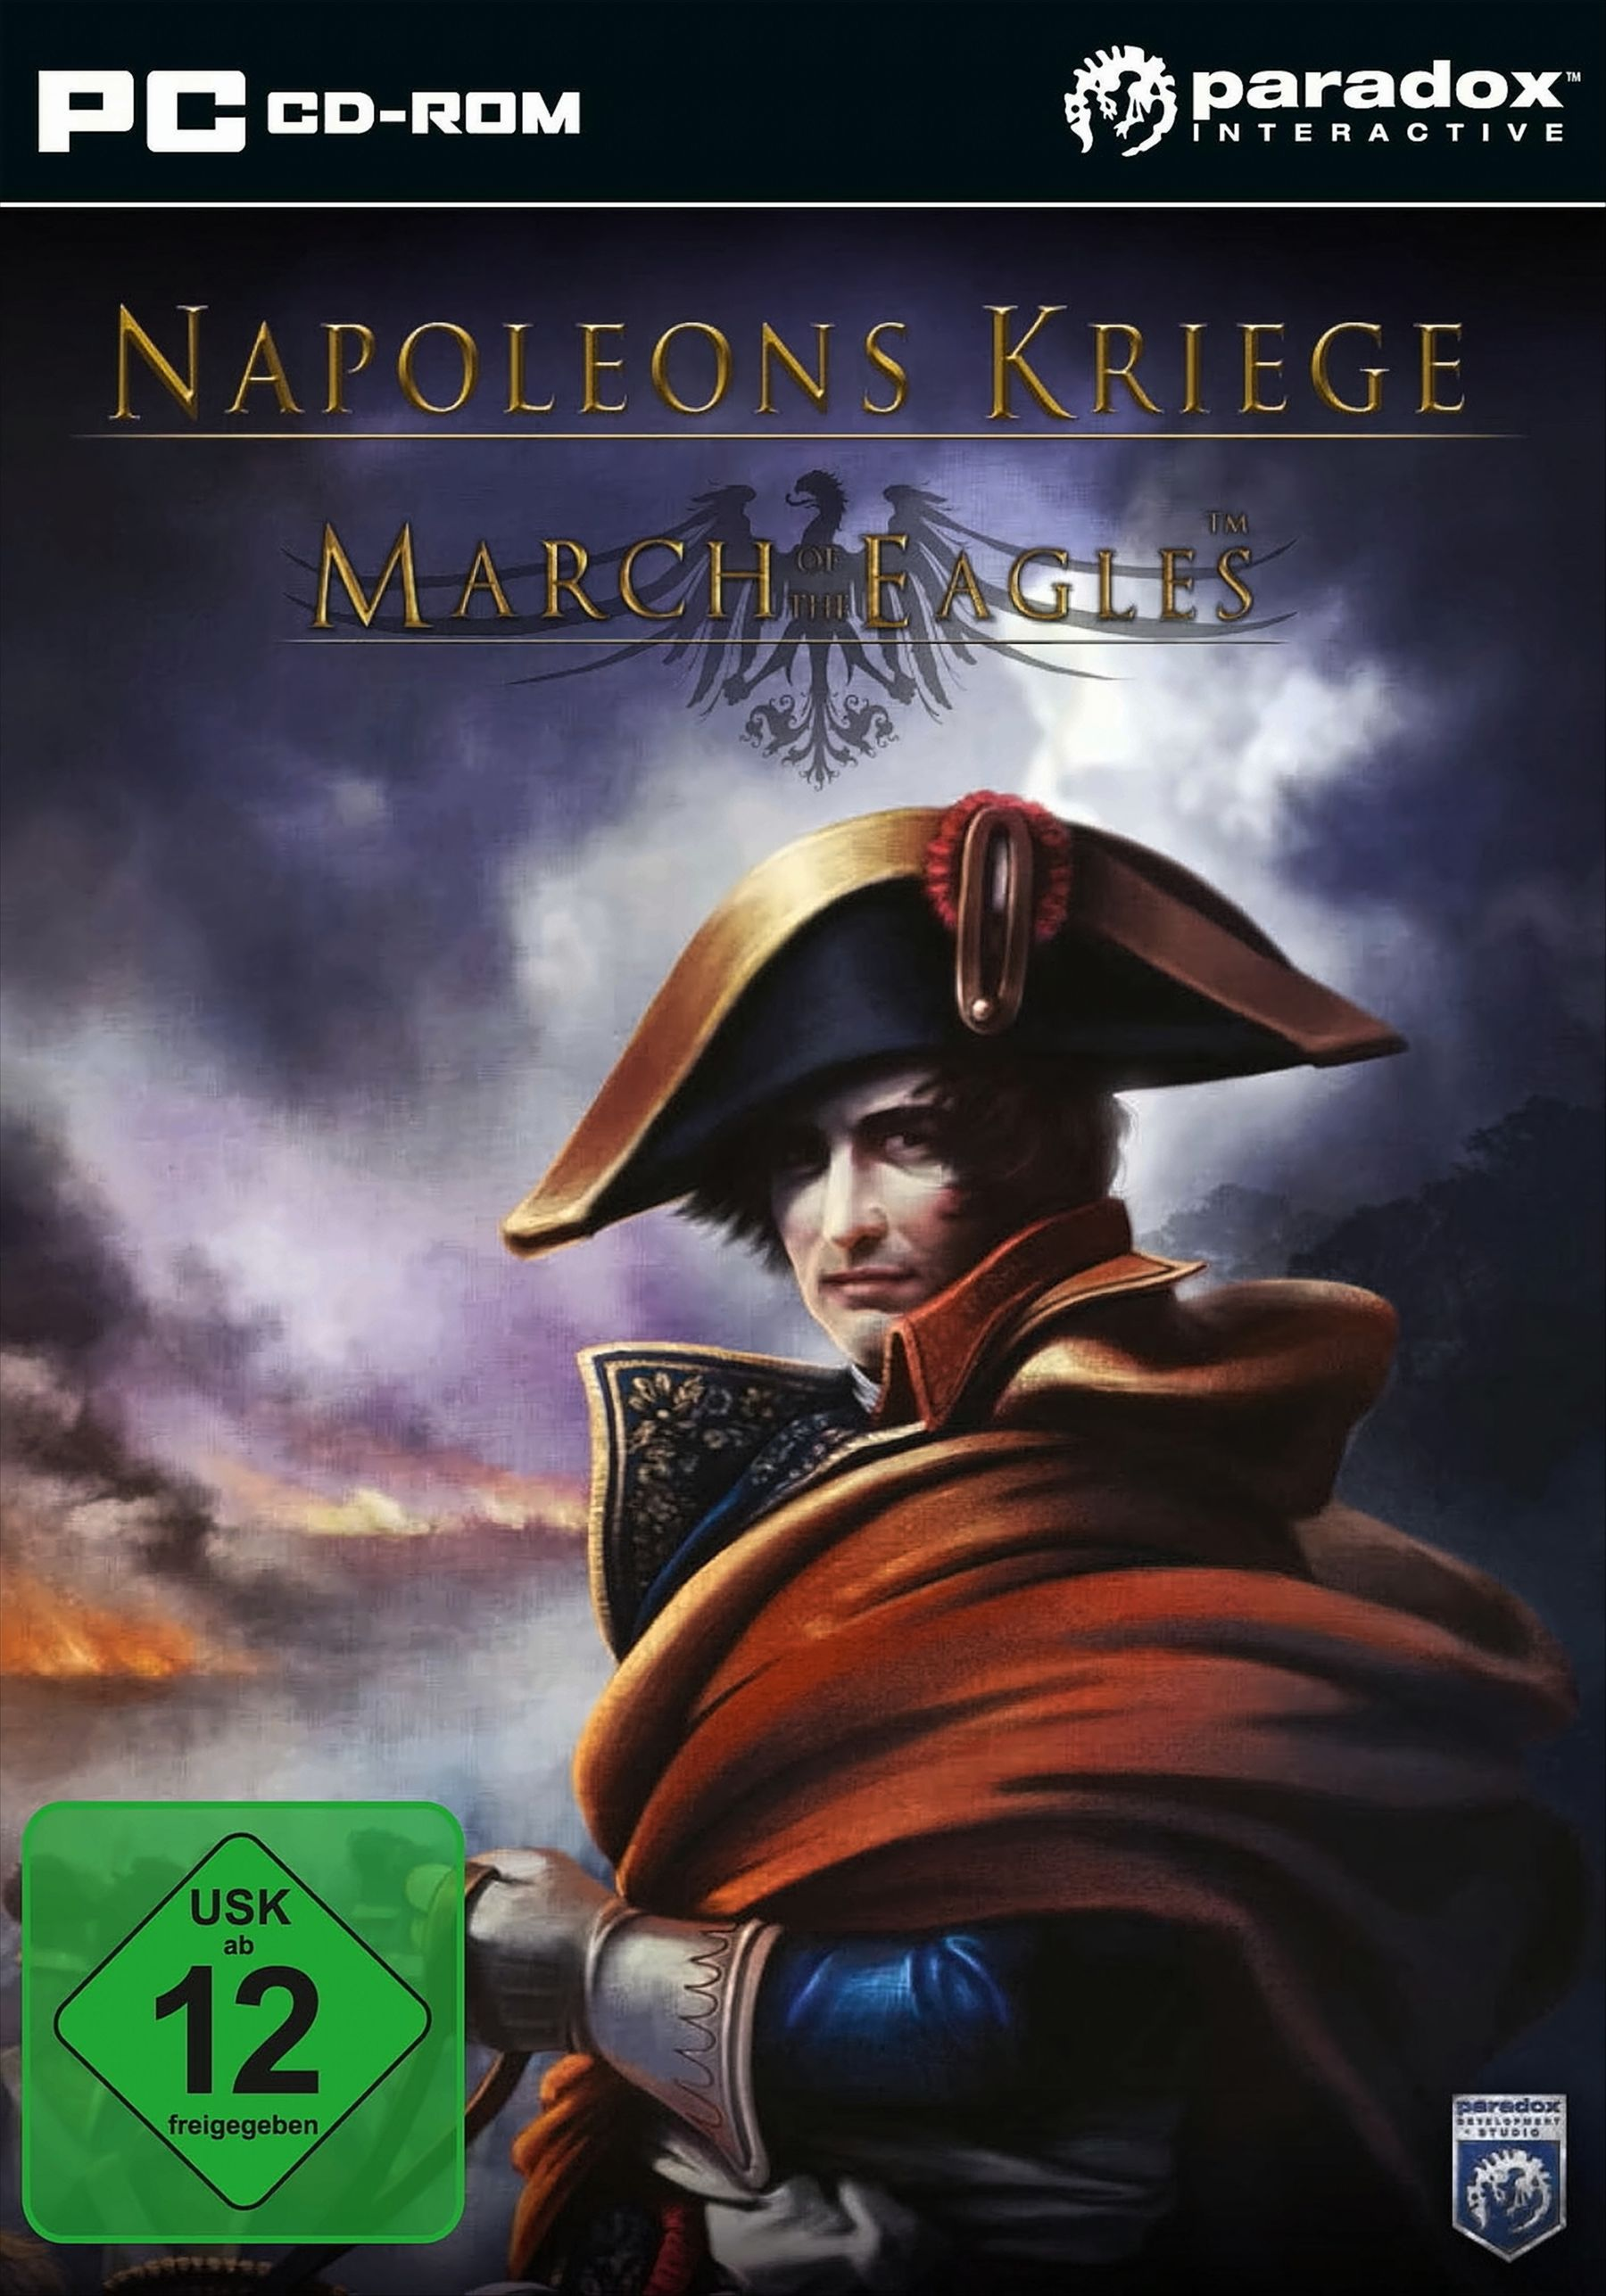 Kriege: Eagles - The March Of [PC] Napoleons